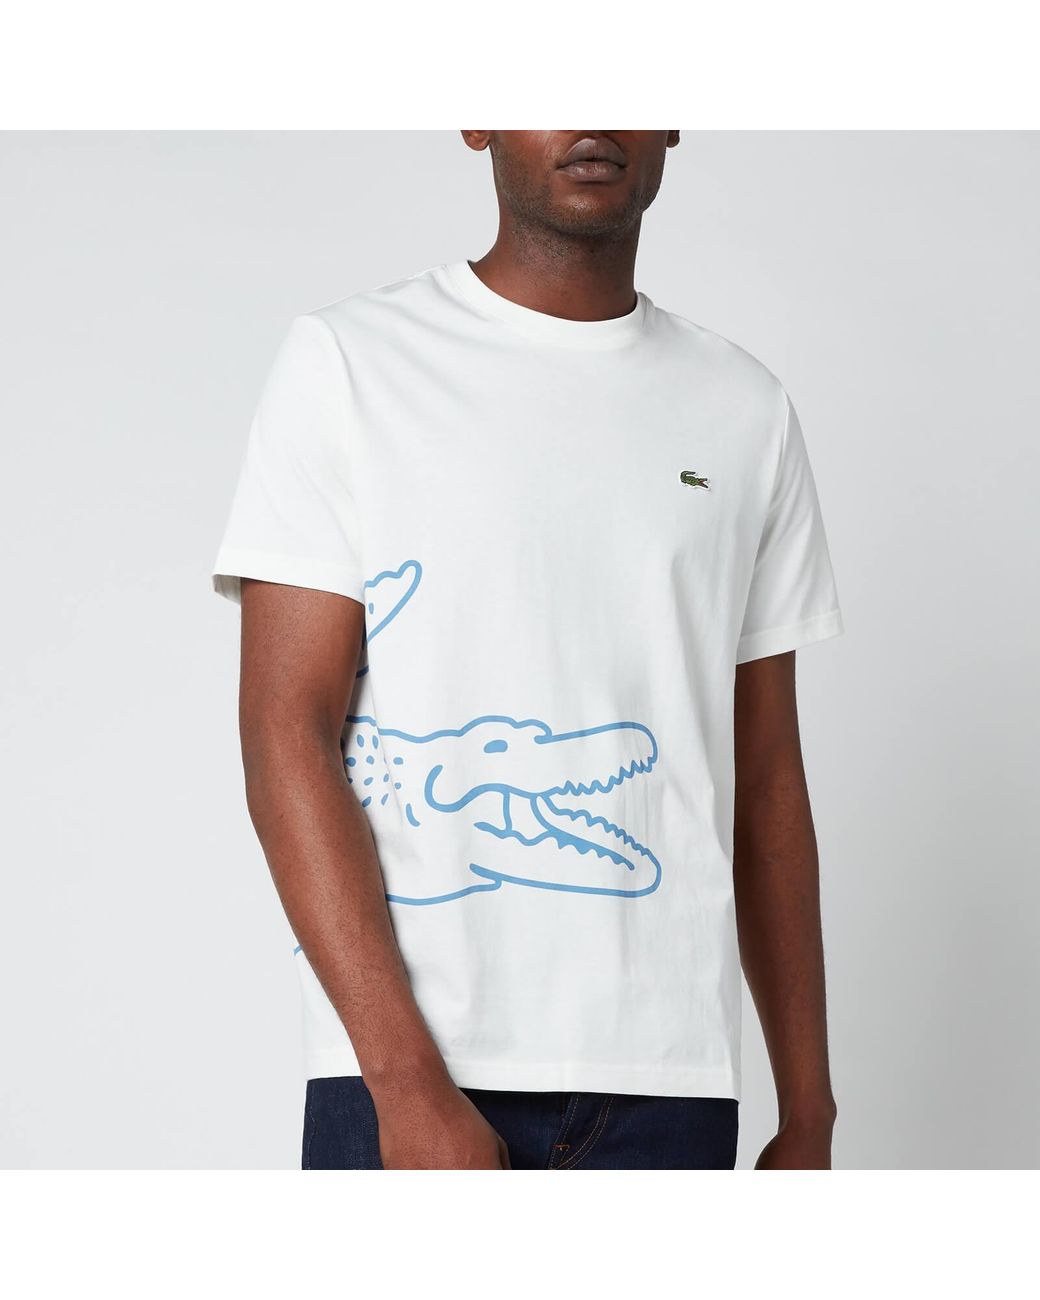 Lacoste Wrap Around Crocodile T-shirt in White for Lyst